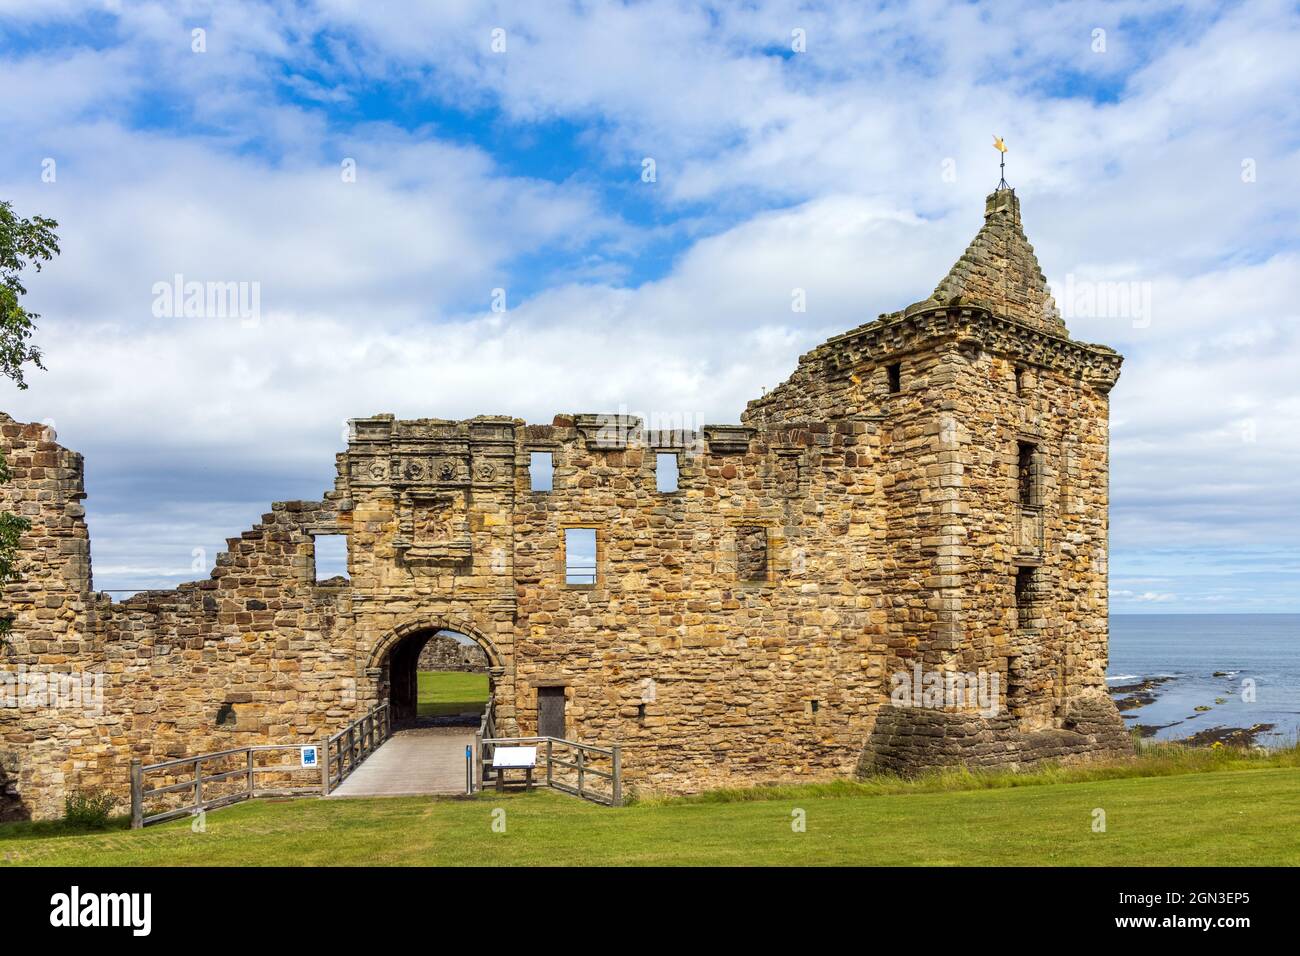 The historic remains of St Andrews Castle, a 13th century medieval fortress situated on a cliff top to the north of the town in Fife. Stock Photo